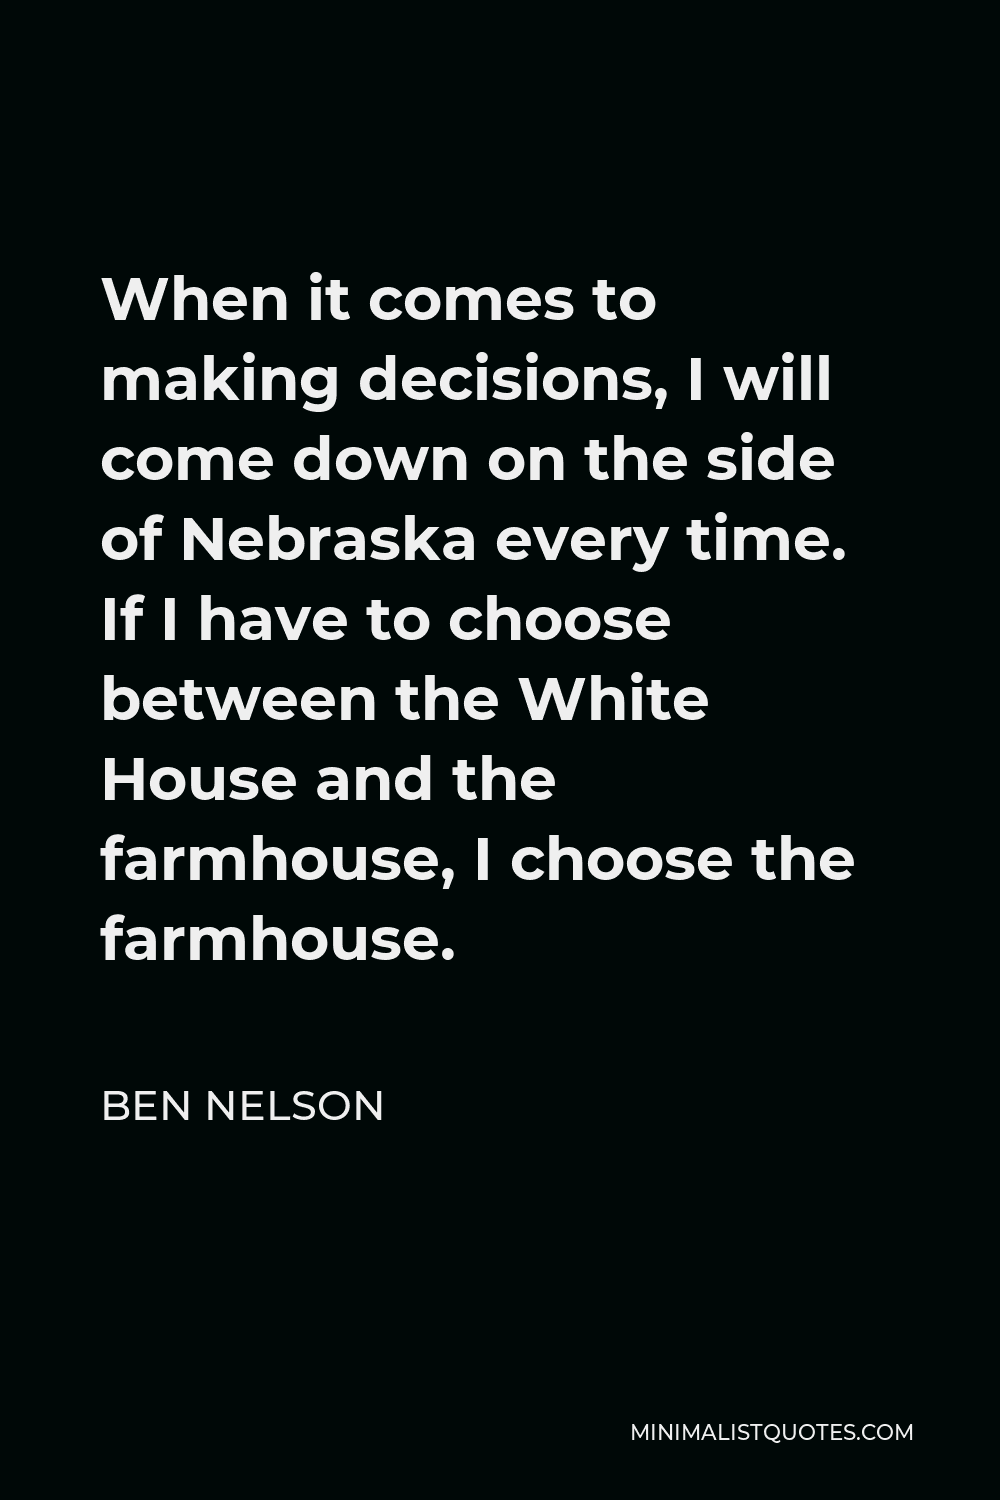 Ben Nelson Quote - When it comes to making decisions, I will come down on the side of Nebraska every time. If I have to choose between the White House and the farmhouse, I choose the farmhouse.